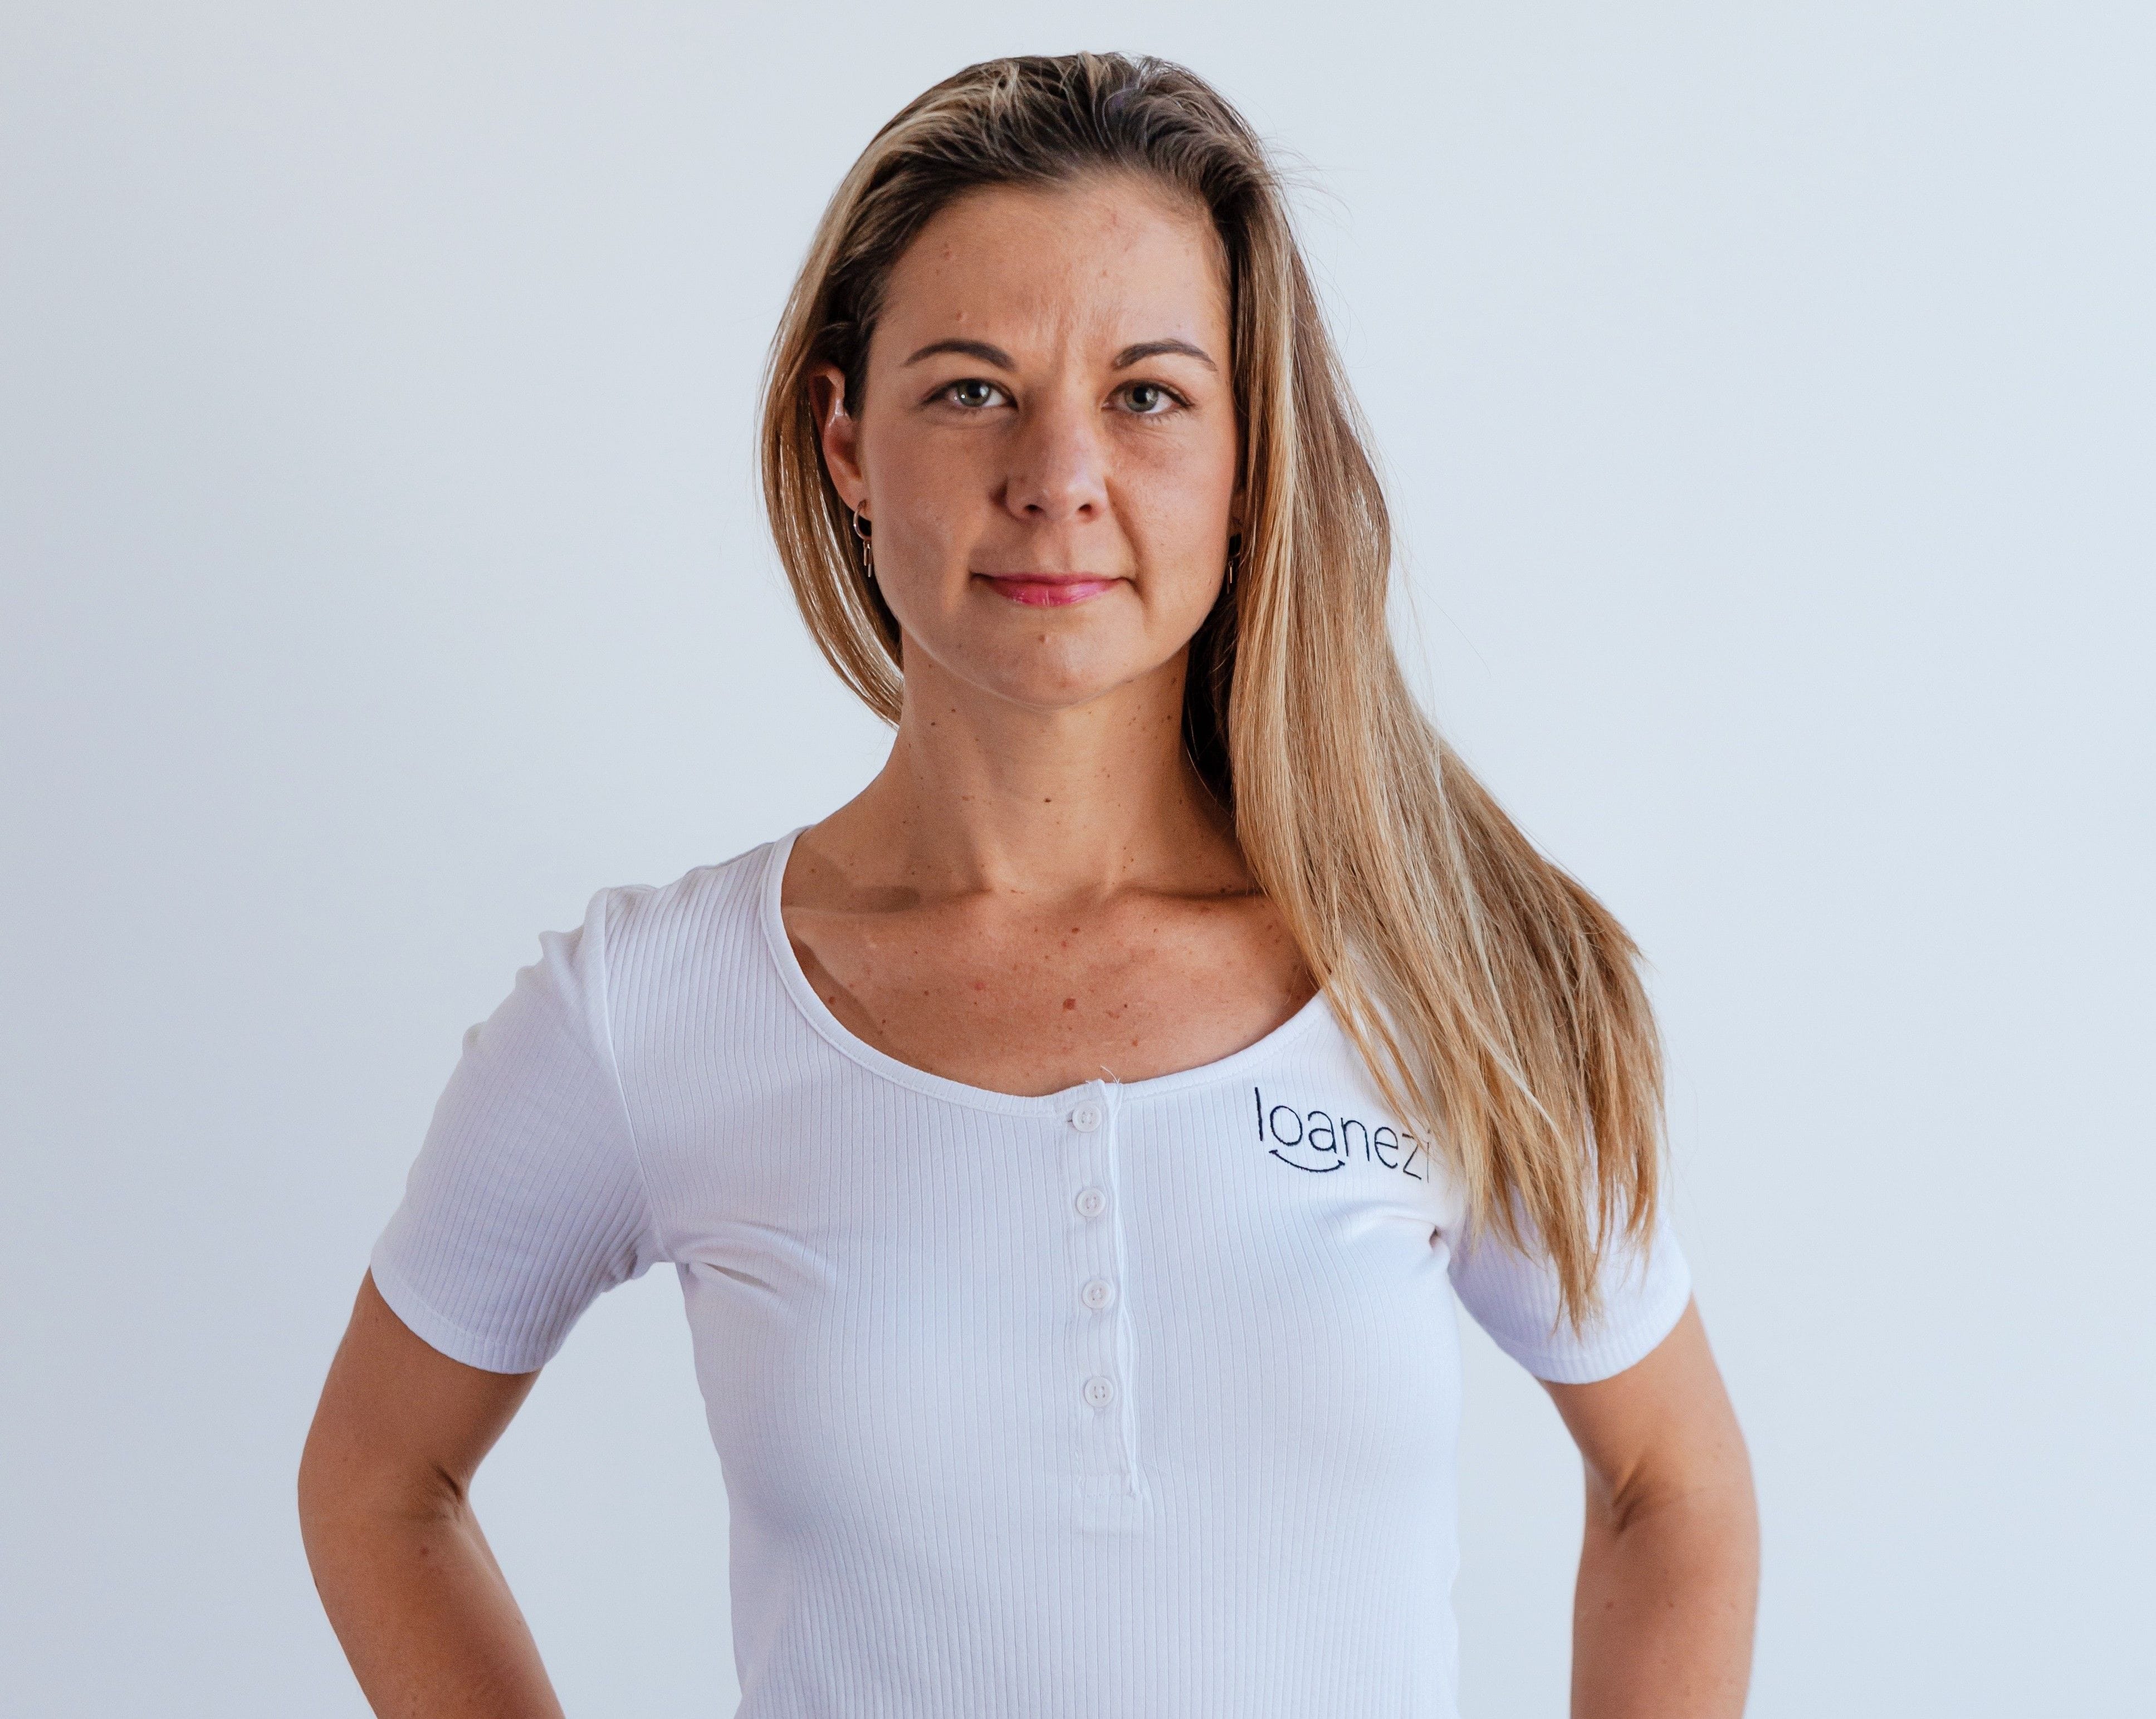 Tocco’s inner entrepreneur shines as she buys back her Loanezi business from Prospa